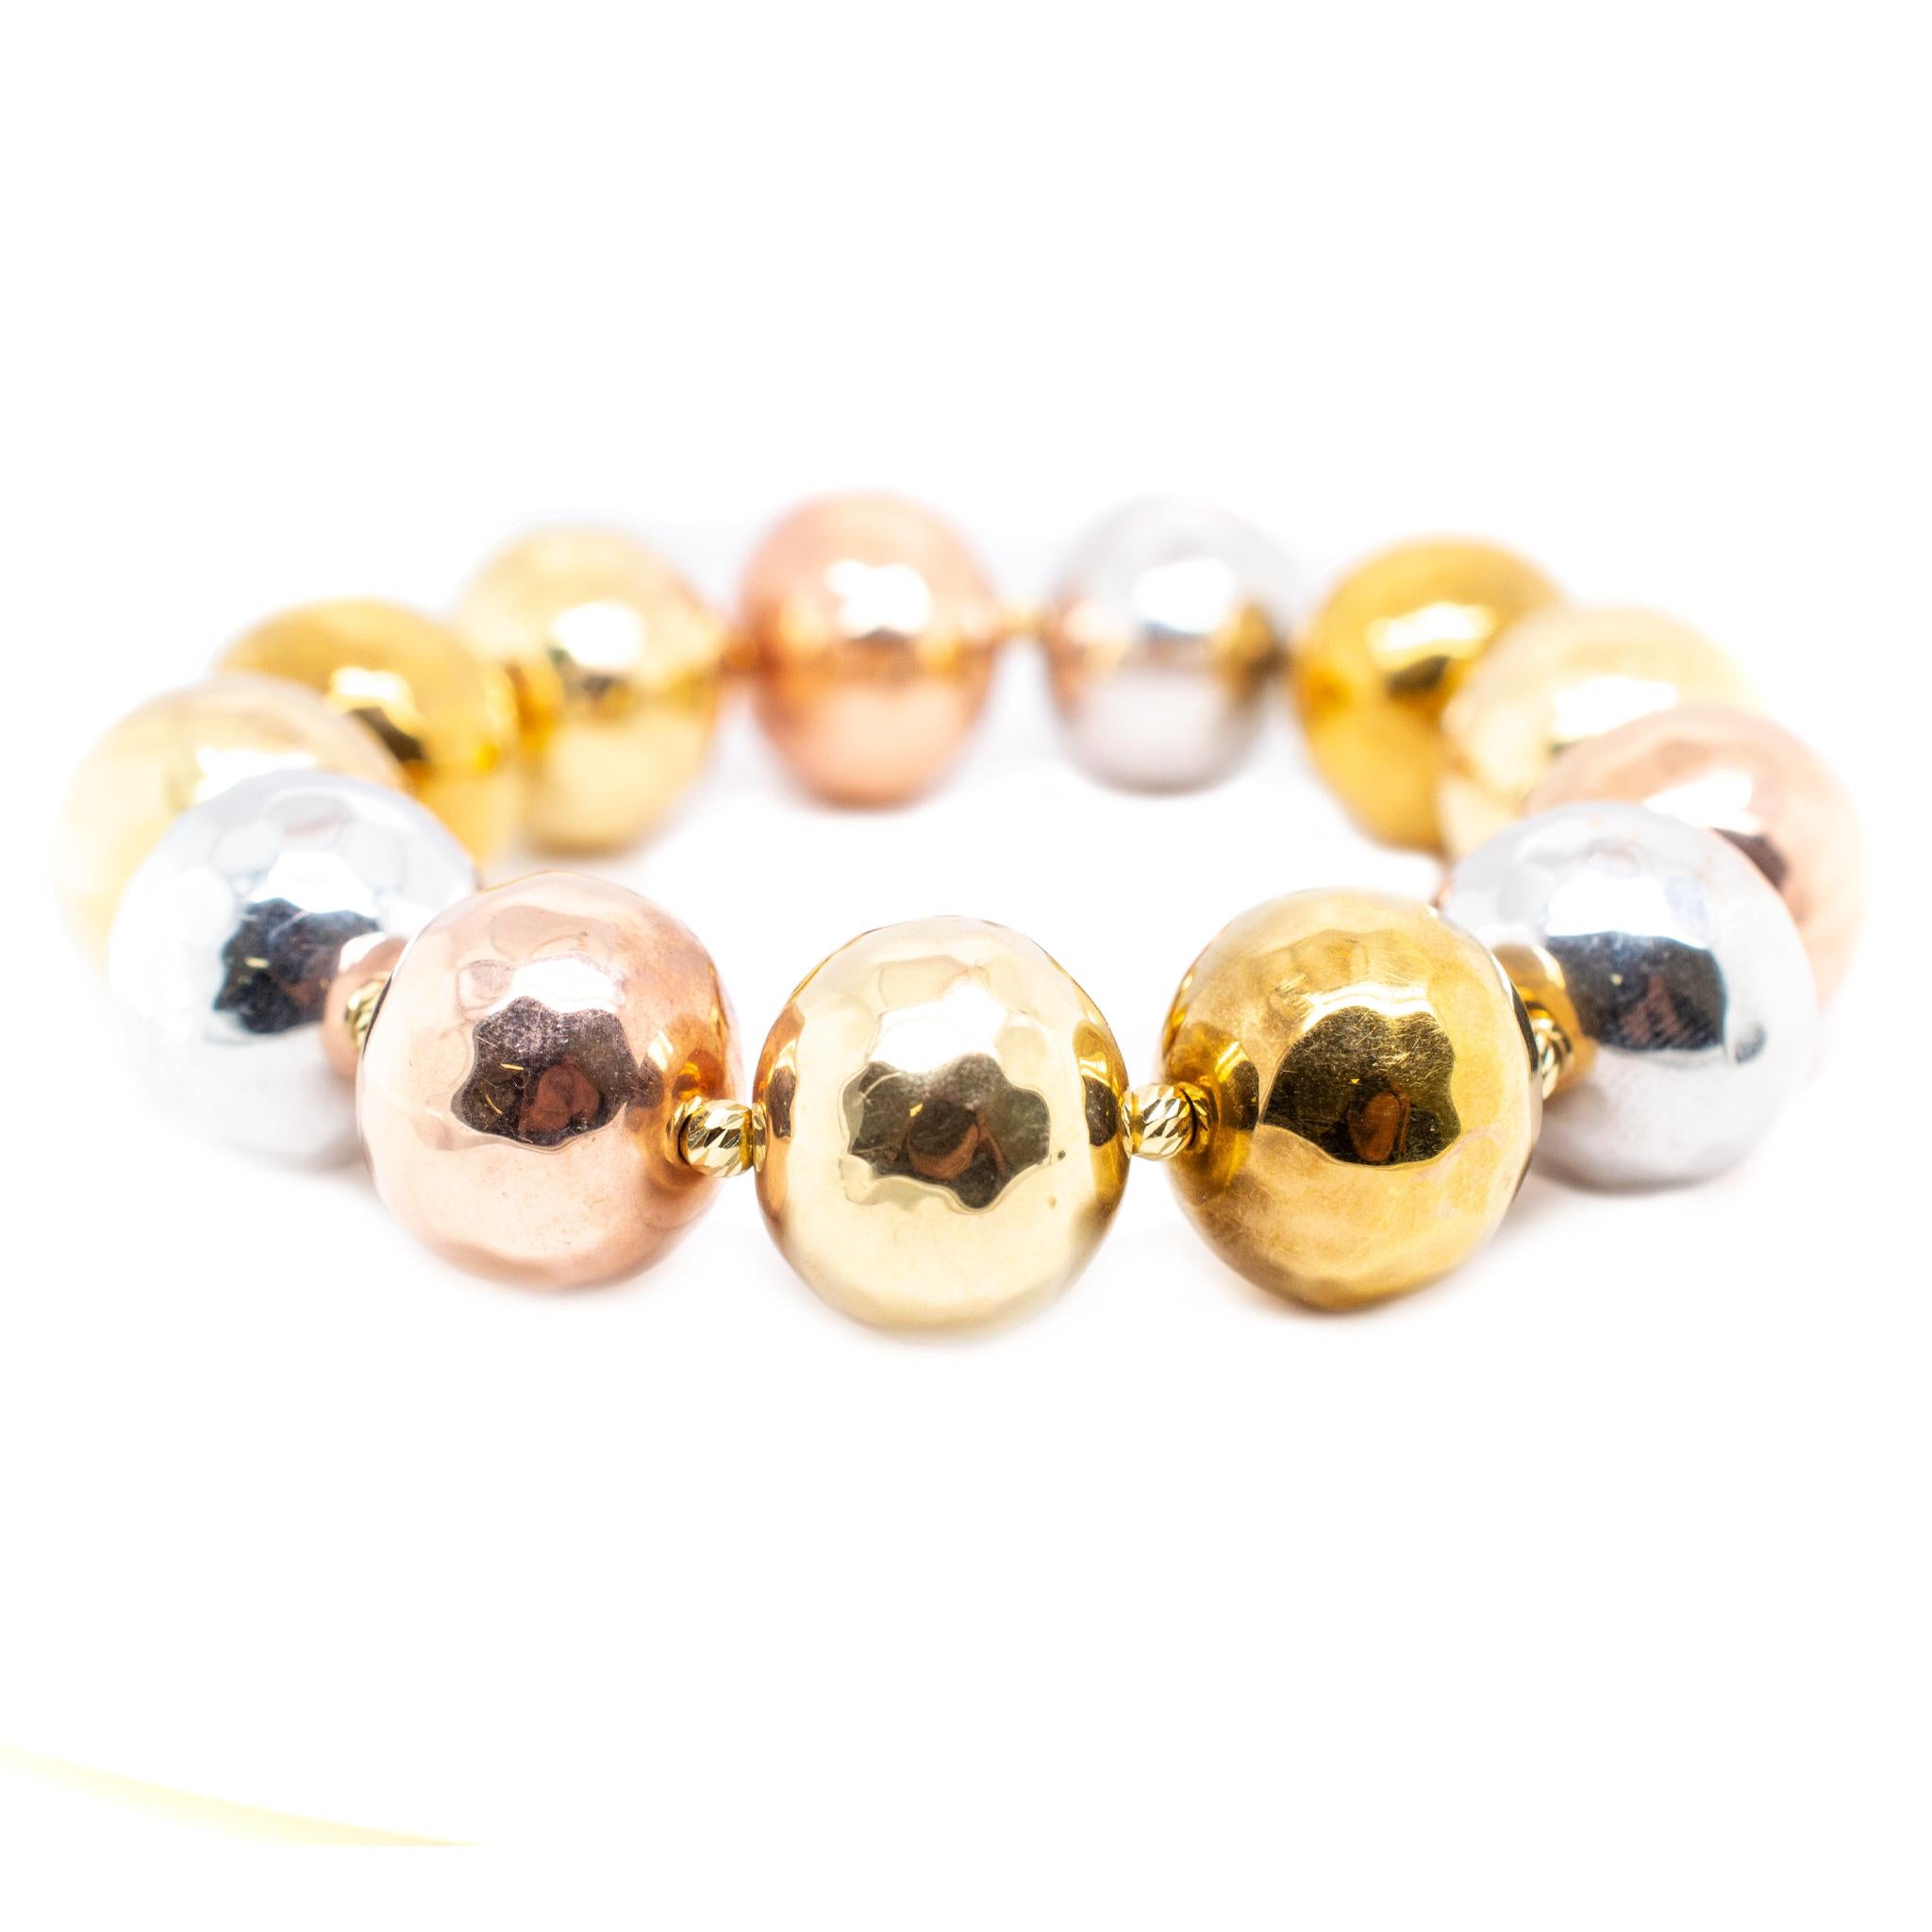 One lady's custom made polished 18K tri-color gold, bead bracelet. The bracelet measures approximately 6.50 inches in length by 16.50mm in diameter and weighs a total of 19.20 grams. In excellent condition.

SKU: 138865